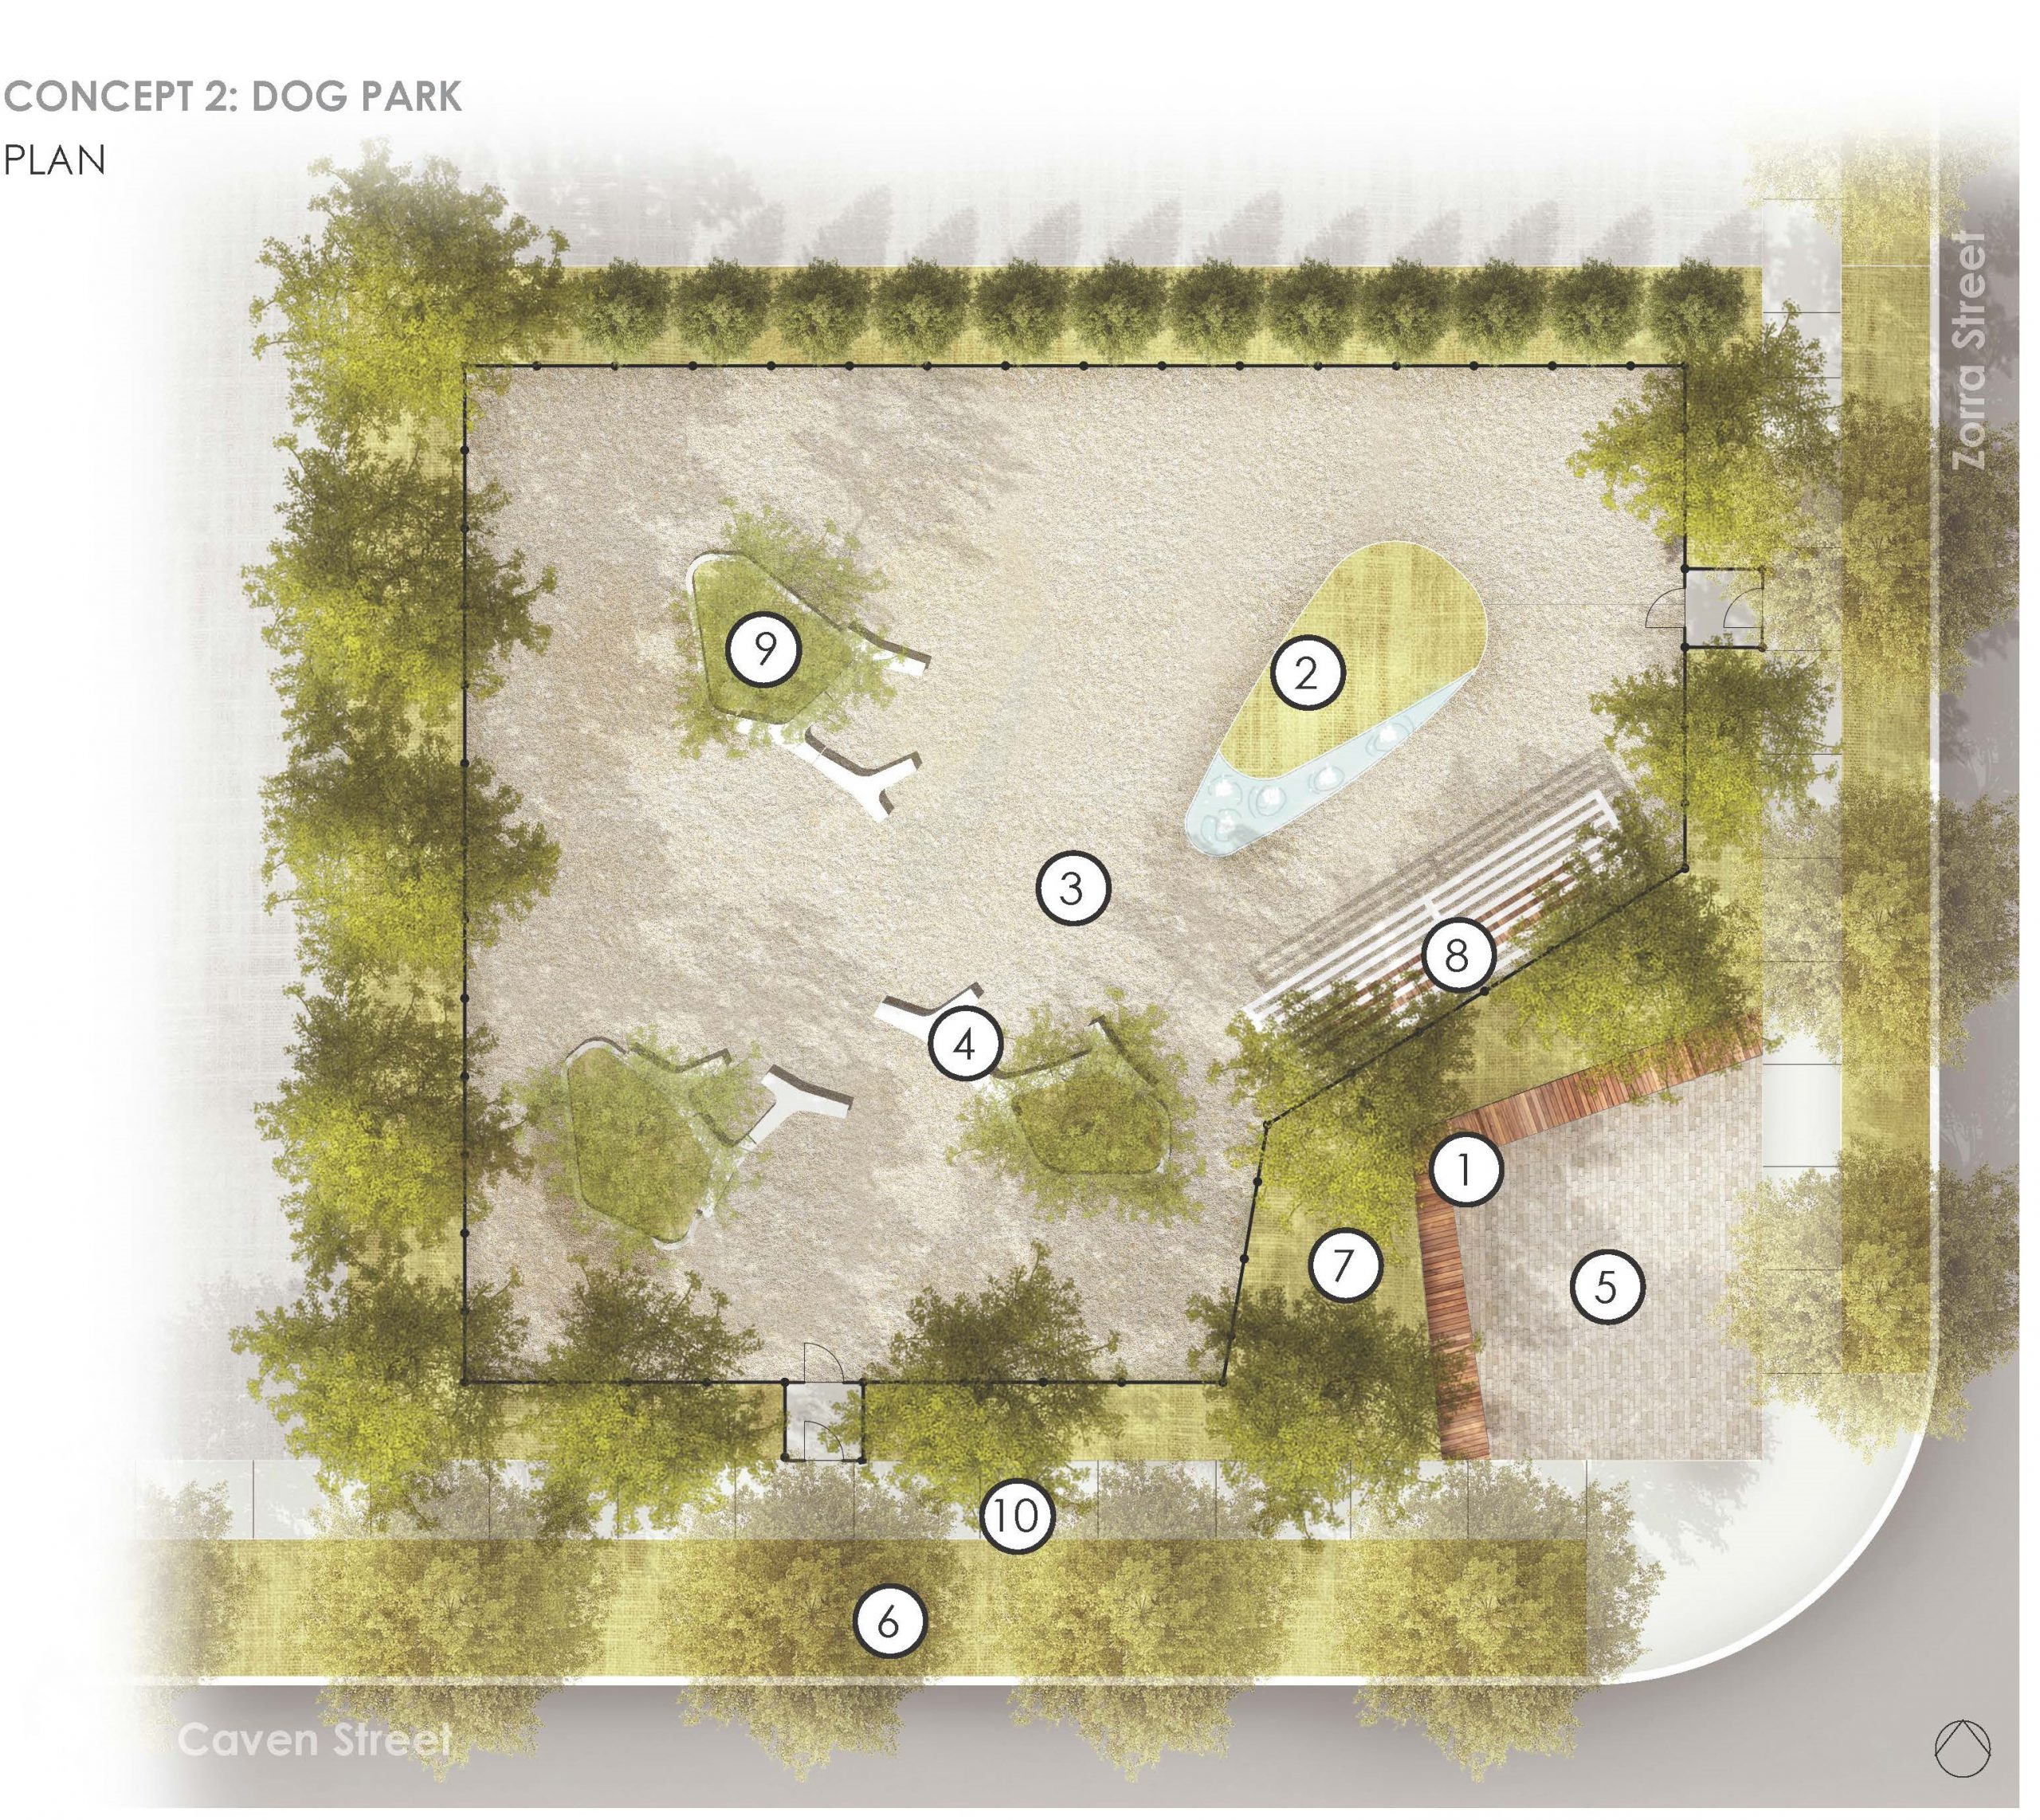 Plan image of Concept 2: Dog Park at the intersection of Caven Street and Zorra Street. Locations of individual park features are numerically keyed to the plan.